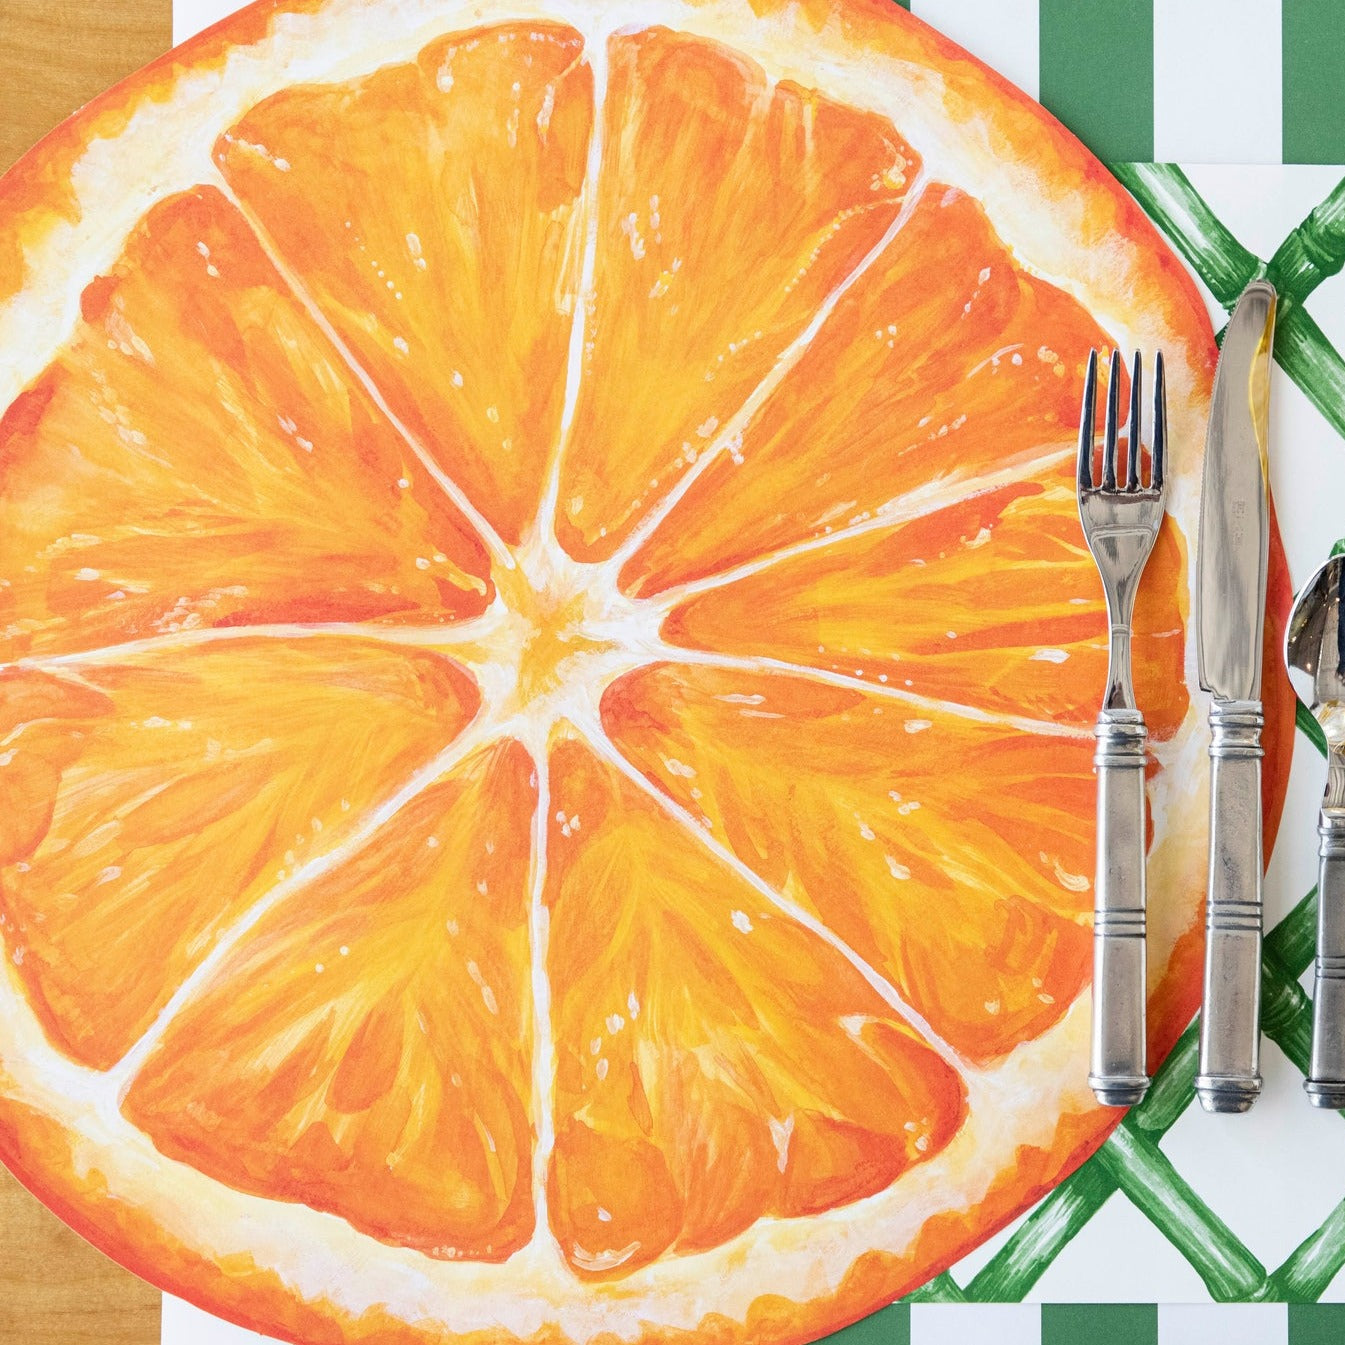 The Die-cut Orange Slice in an elegant place setting sans plate, from above.